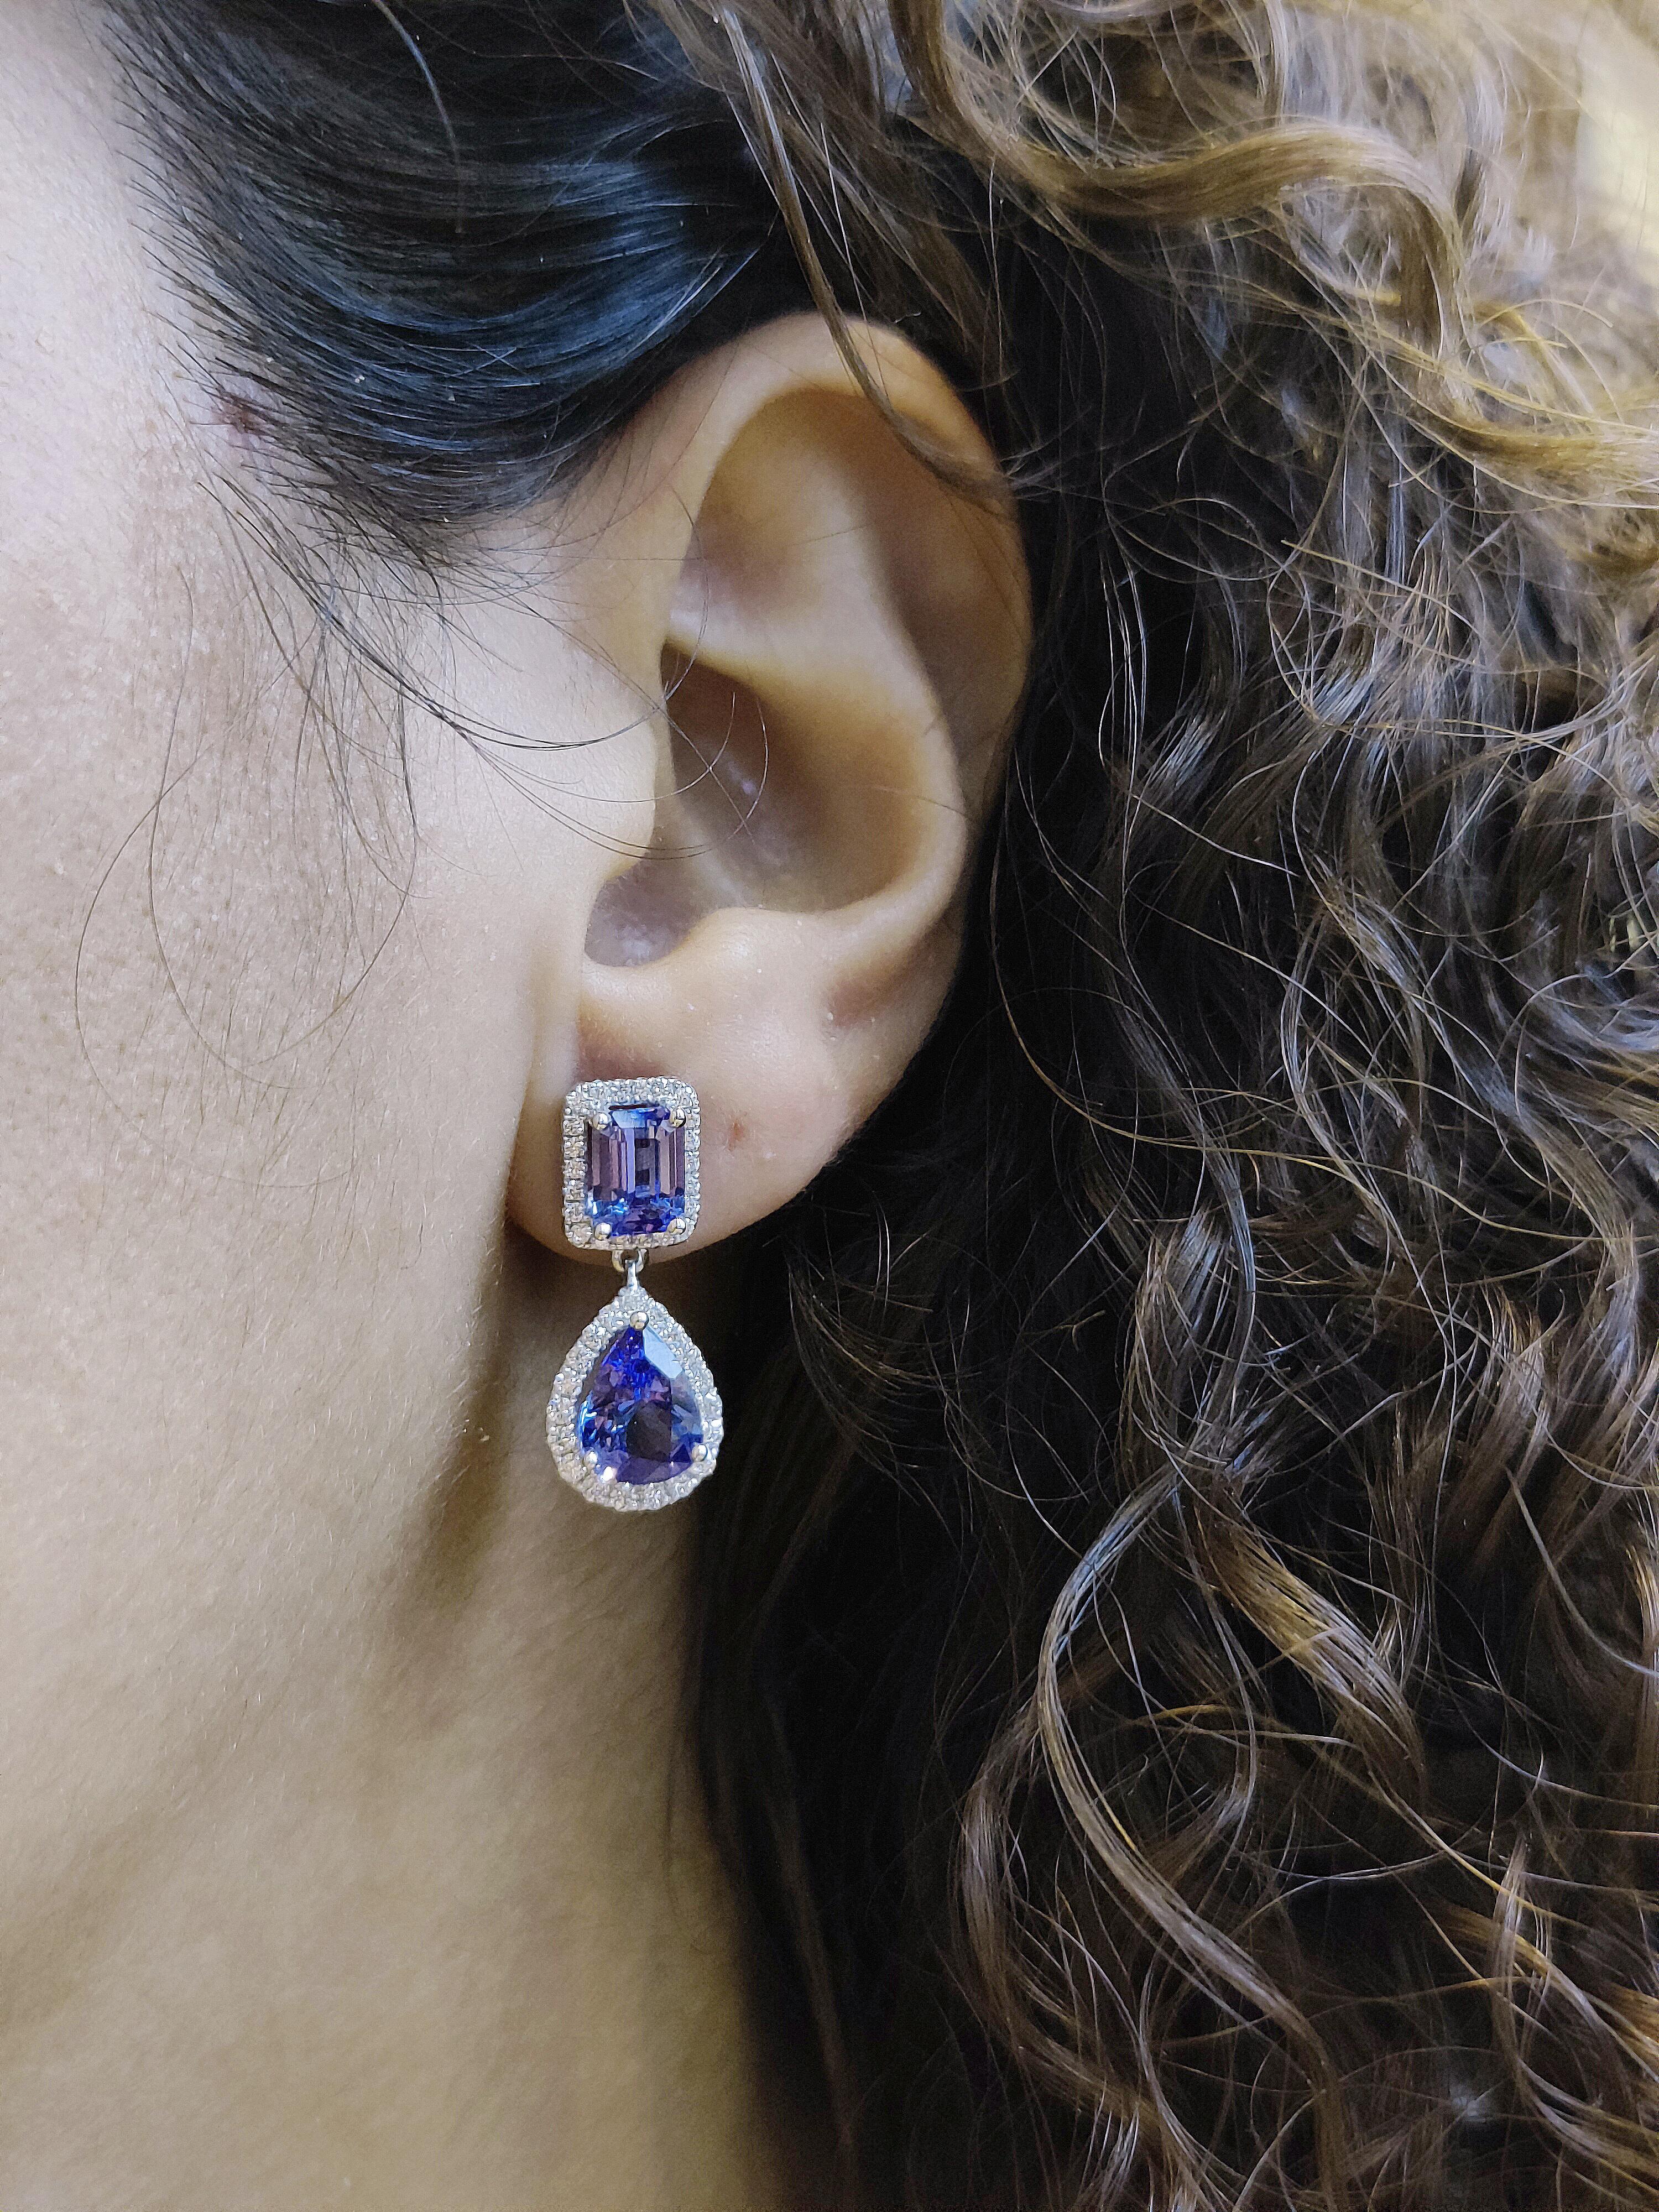 Cool tanzanite, bright gold and fiery diamonds—the epitome of elegance, this drop earring is a timeless addition to any fine-jewelry collection.

These earrings are made in 18 karat white gold. The 4 violet blue tanzanites have a total of 6.05